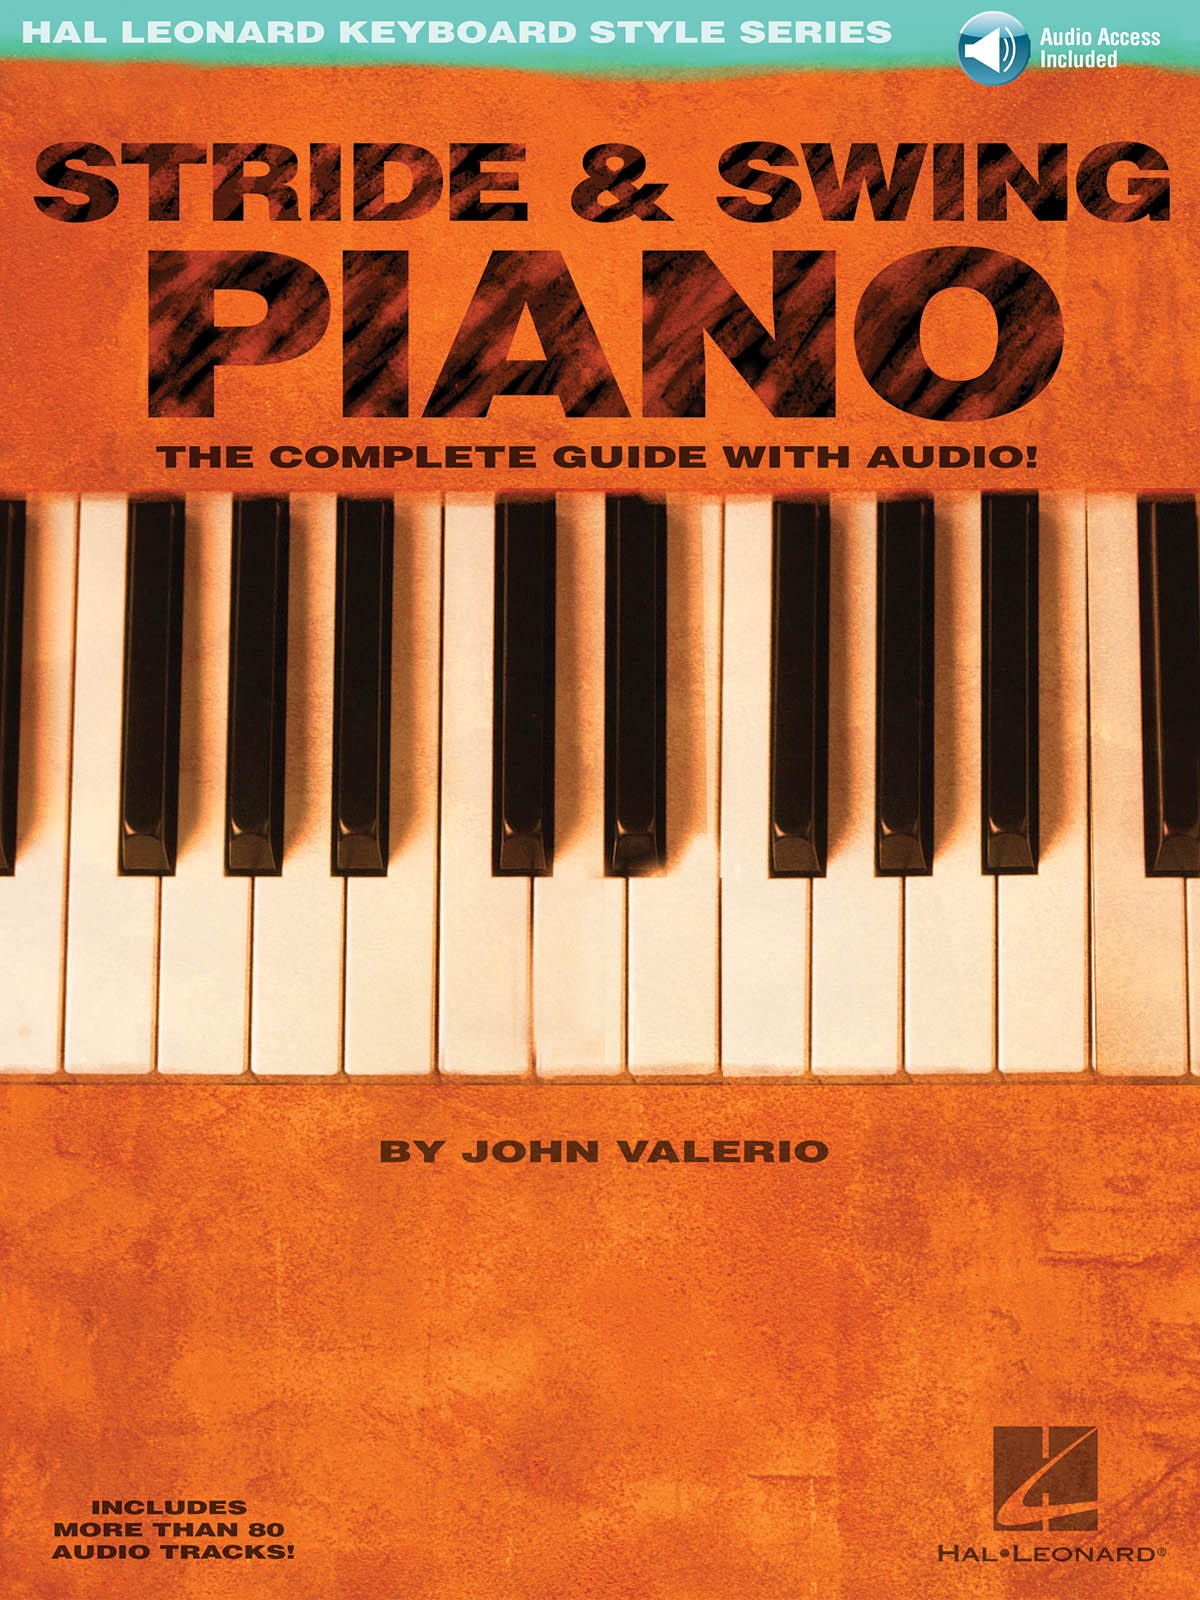 Stride And Swing Piano published by Hal Leonard (Book/Online Audio)